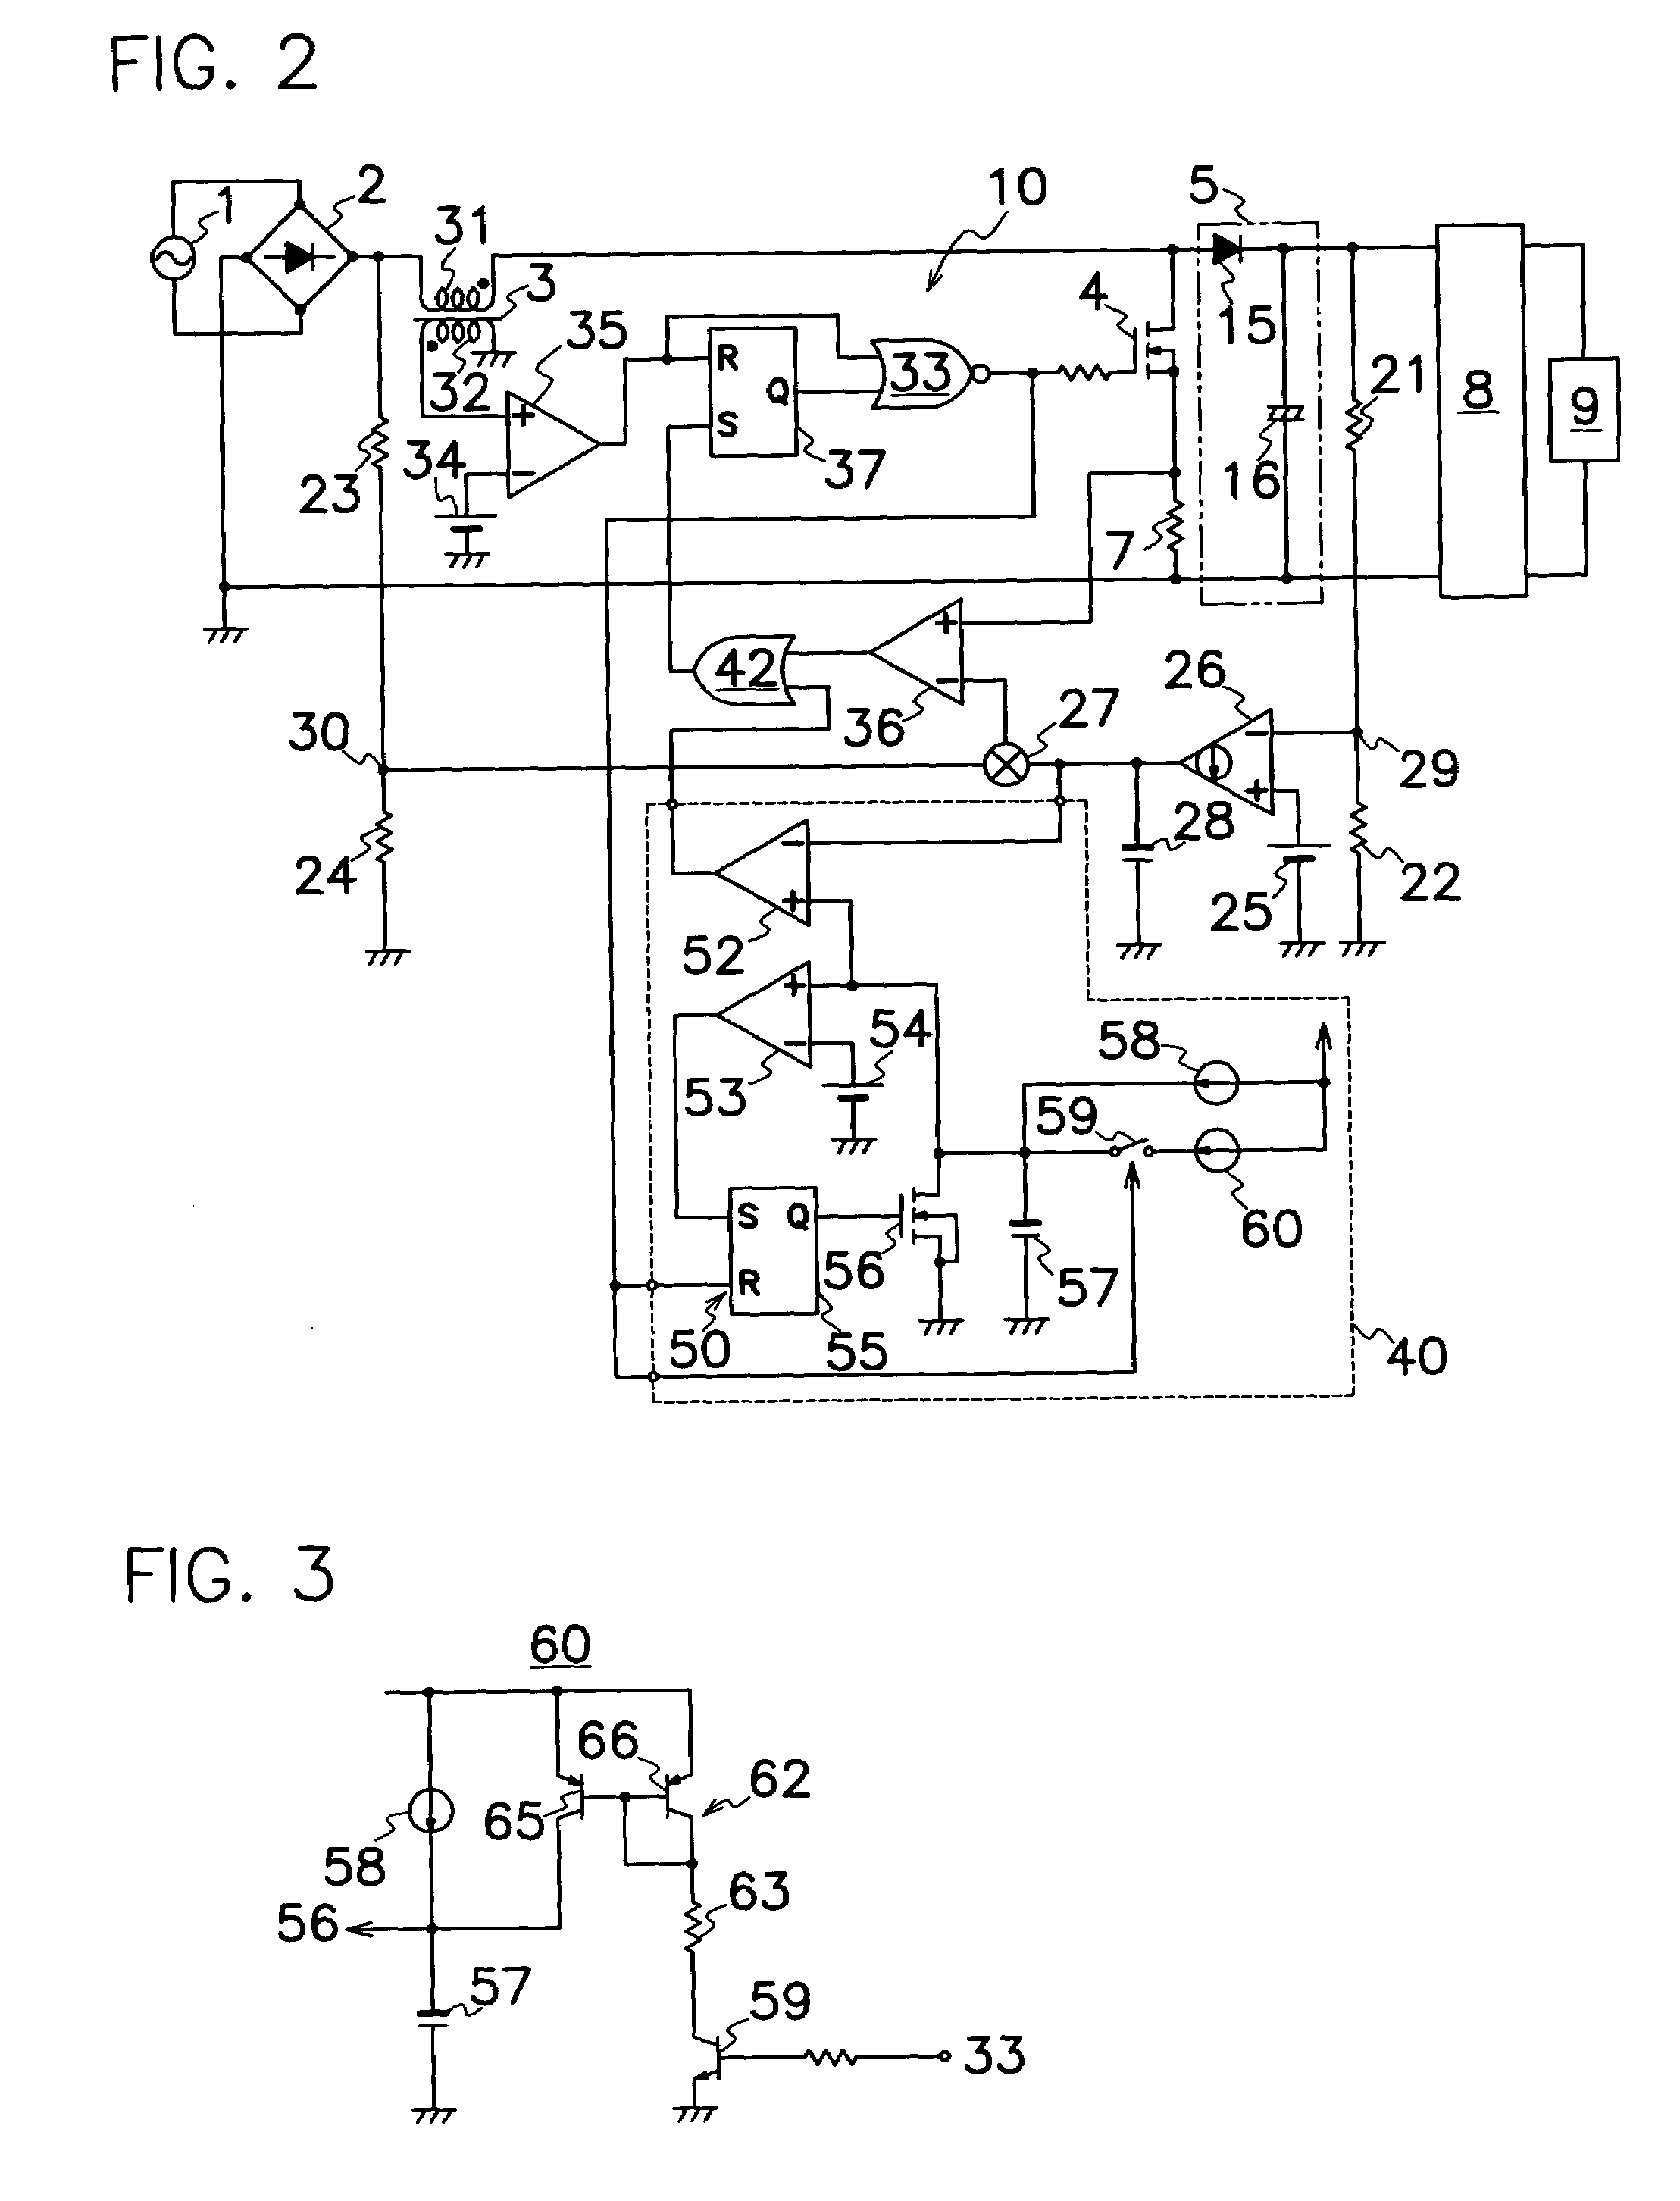 Switching power source device